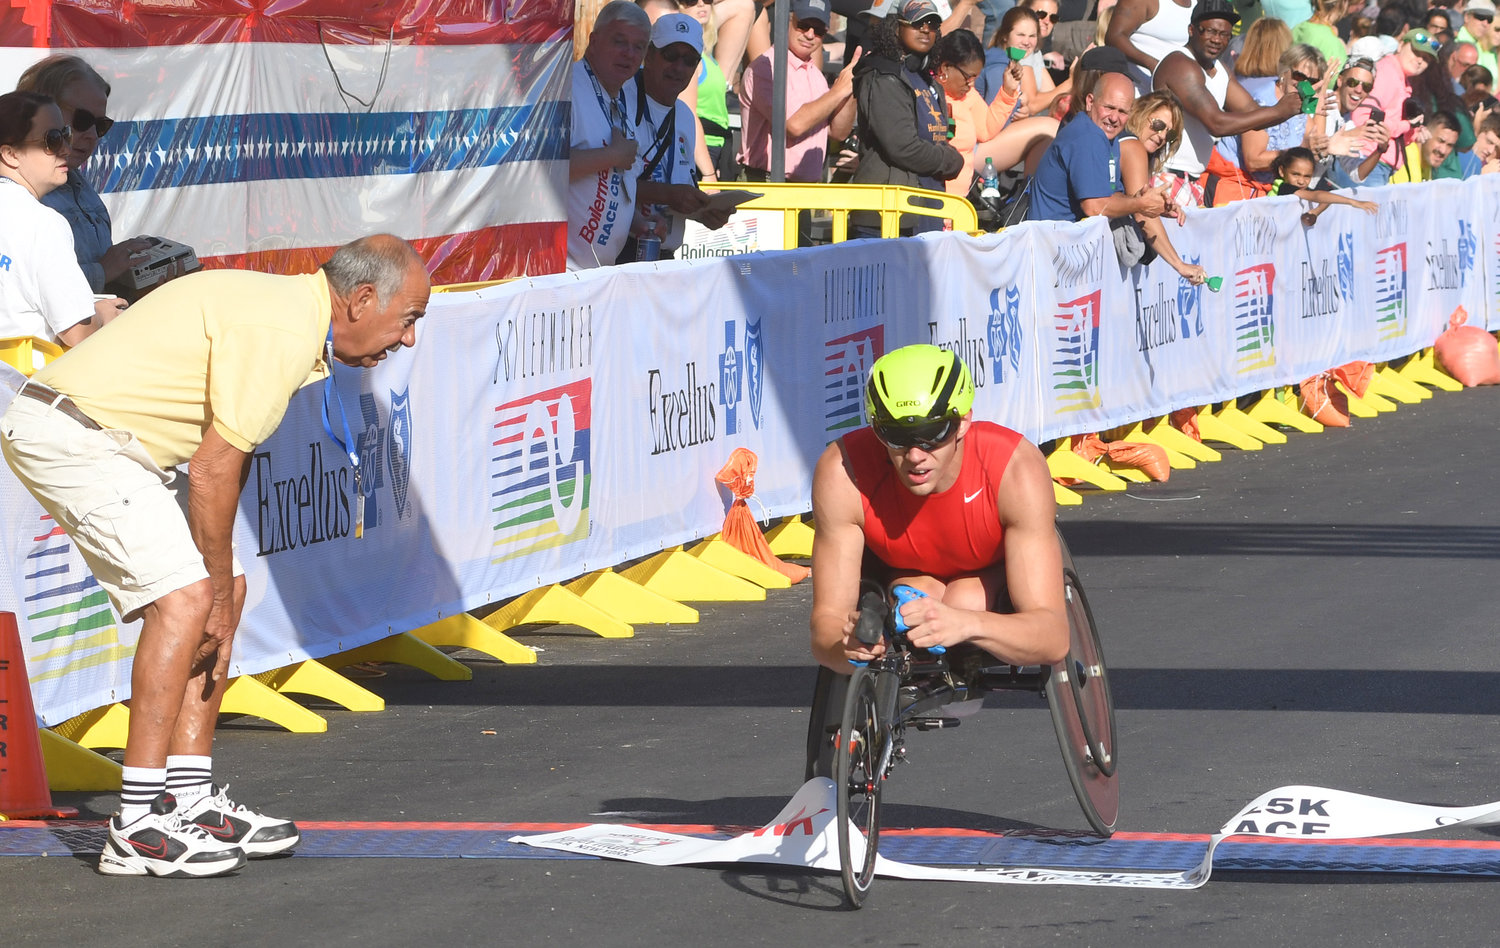 Daniel Romanchuk is a four-time winner in the Boilermaker Road Race's wheelchair division. Romanchuk, a standout athlete, is in the Boilermaker field again. The field includes 38 participants, which is one of the bigger fields for the division at the Boilermaker. There are 10 female participants, which is among the most the race has had.